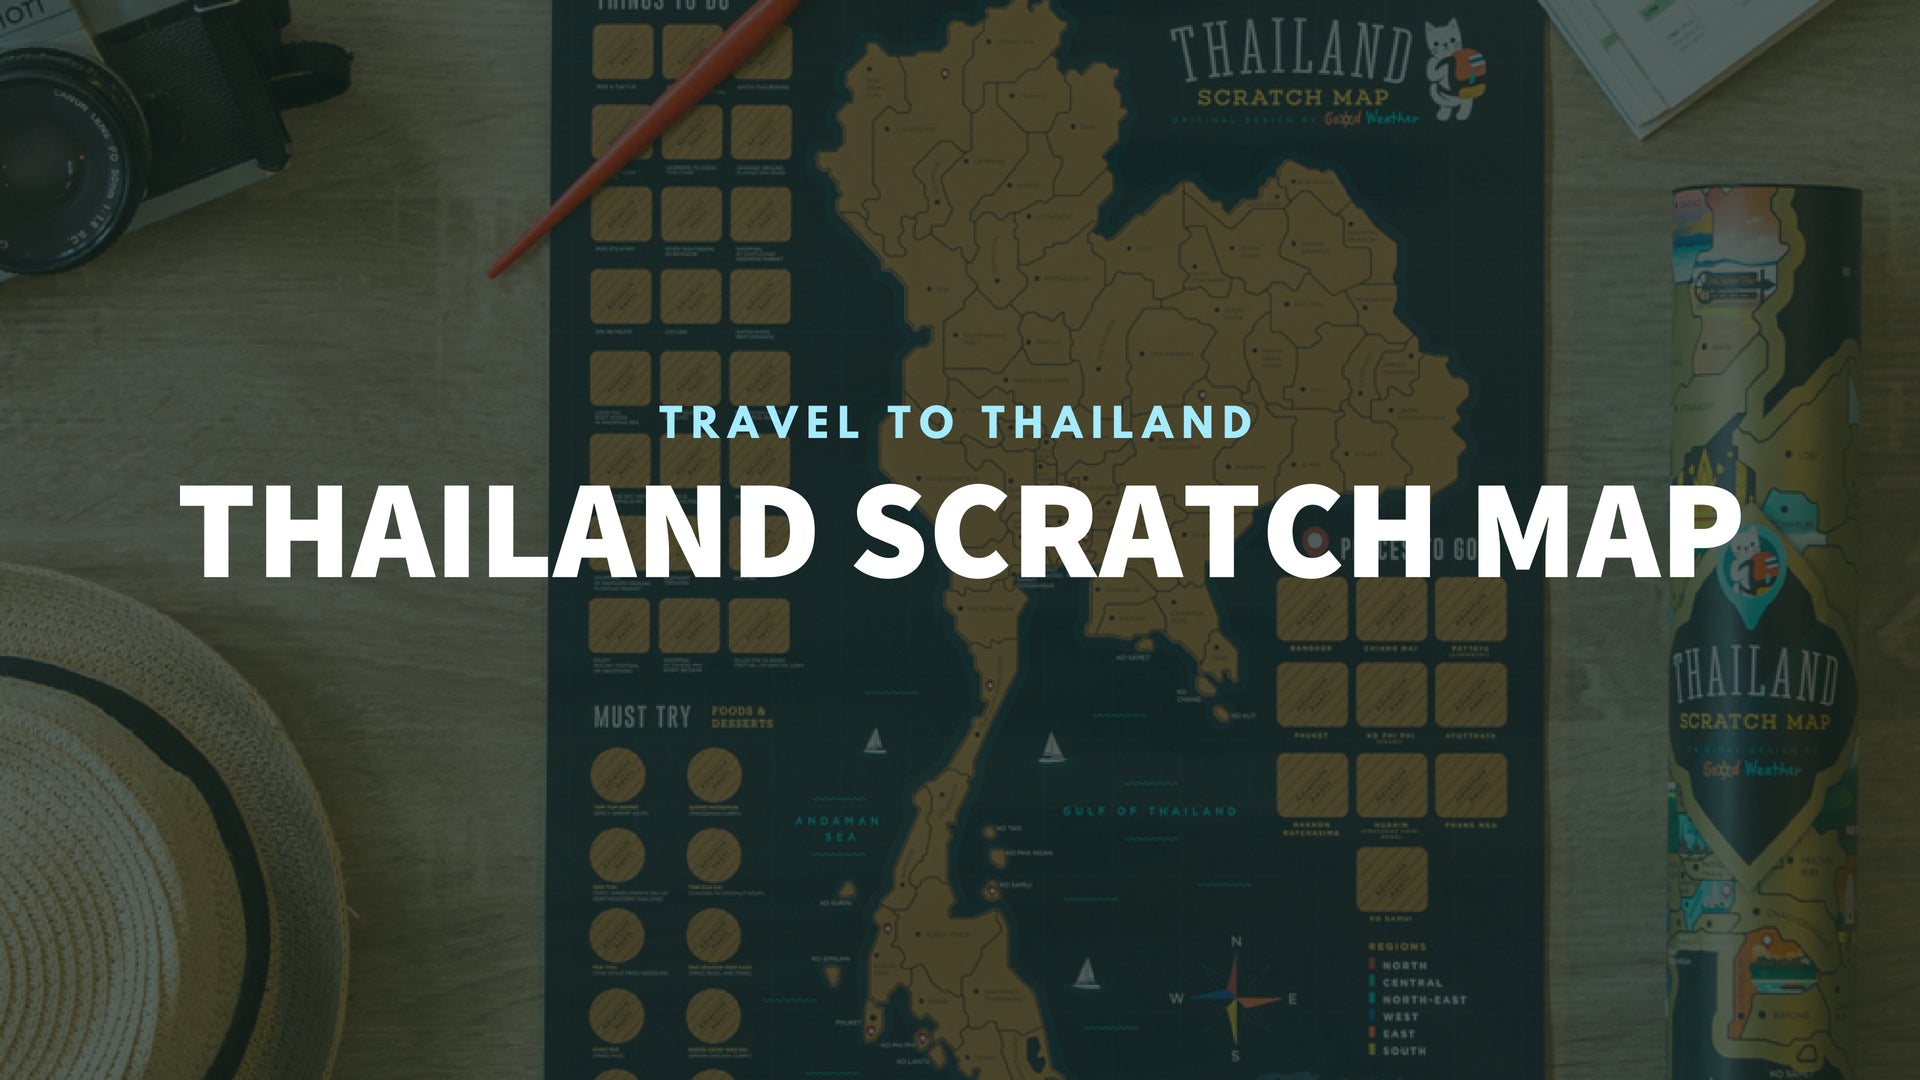 Good Weather Thailand Scratch Travel Map Travel to Thailand deluxe luckies world travel map with pins europe uk rosegold small personalised Scratch Off Traveling Thailand travelization 泰國 刮刮地圖 刮刮樂 世界地圖 banner - GadgetiCloud